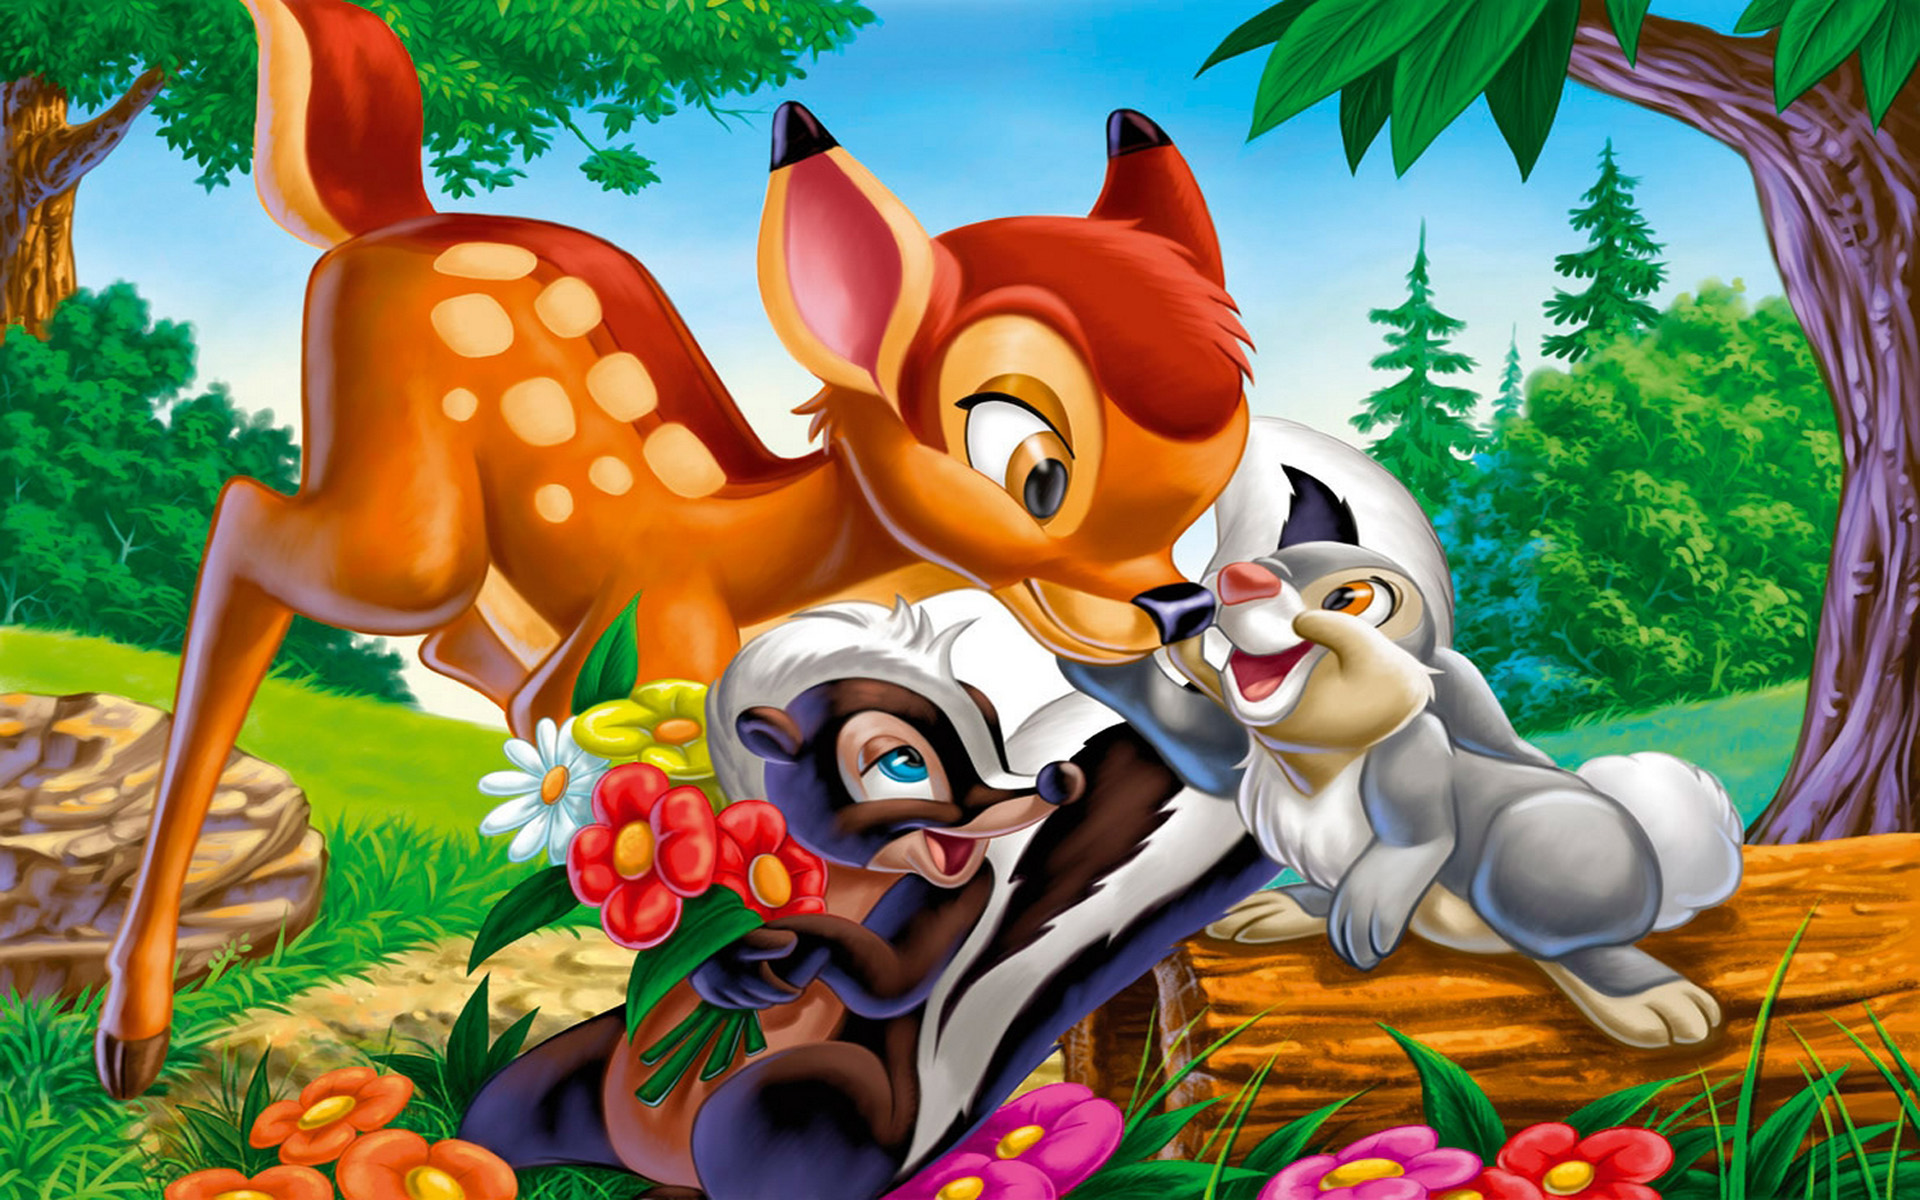 Bambi Thumper And Flower Cartoons Character From Disney's Image For